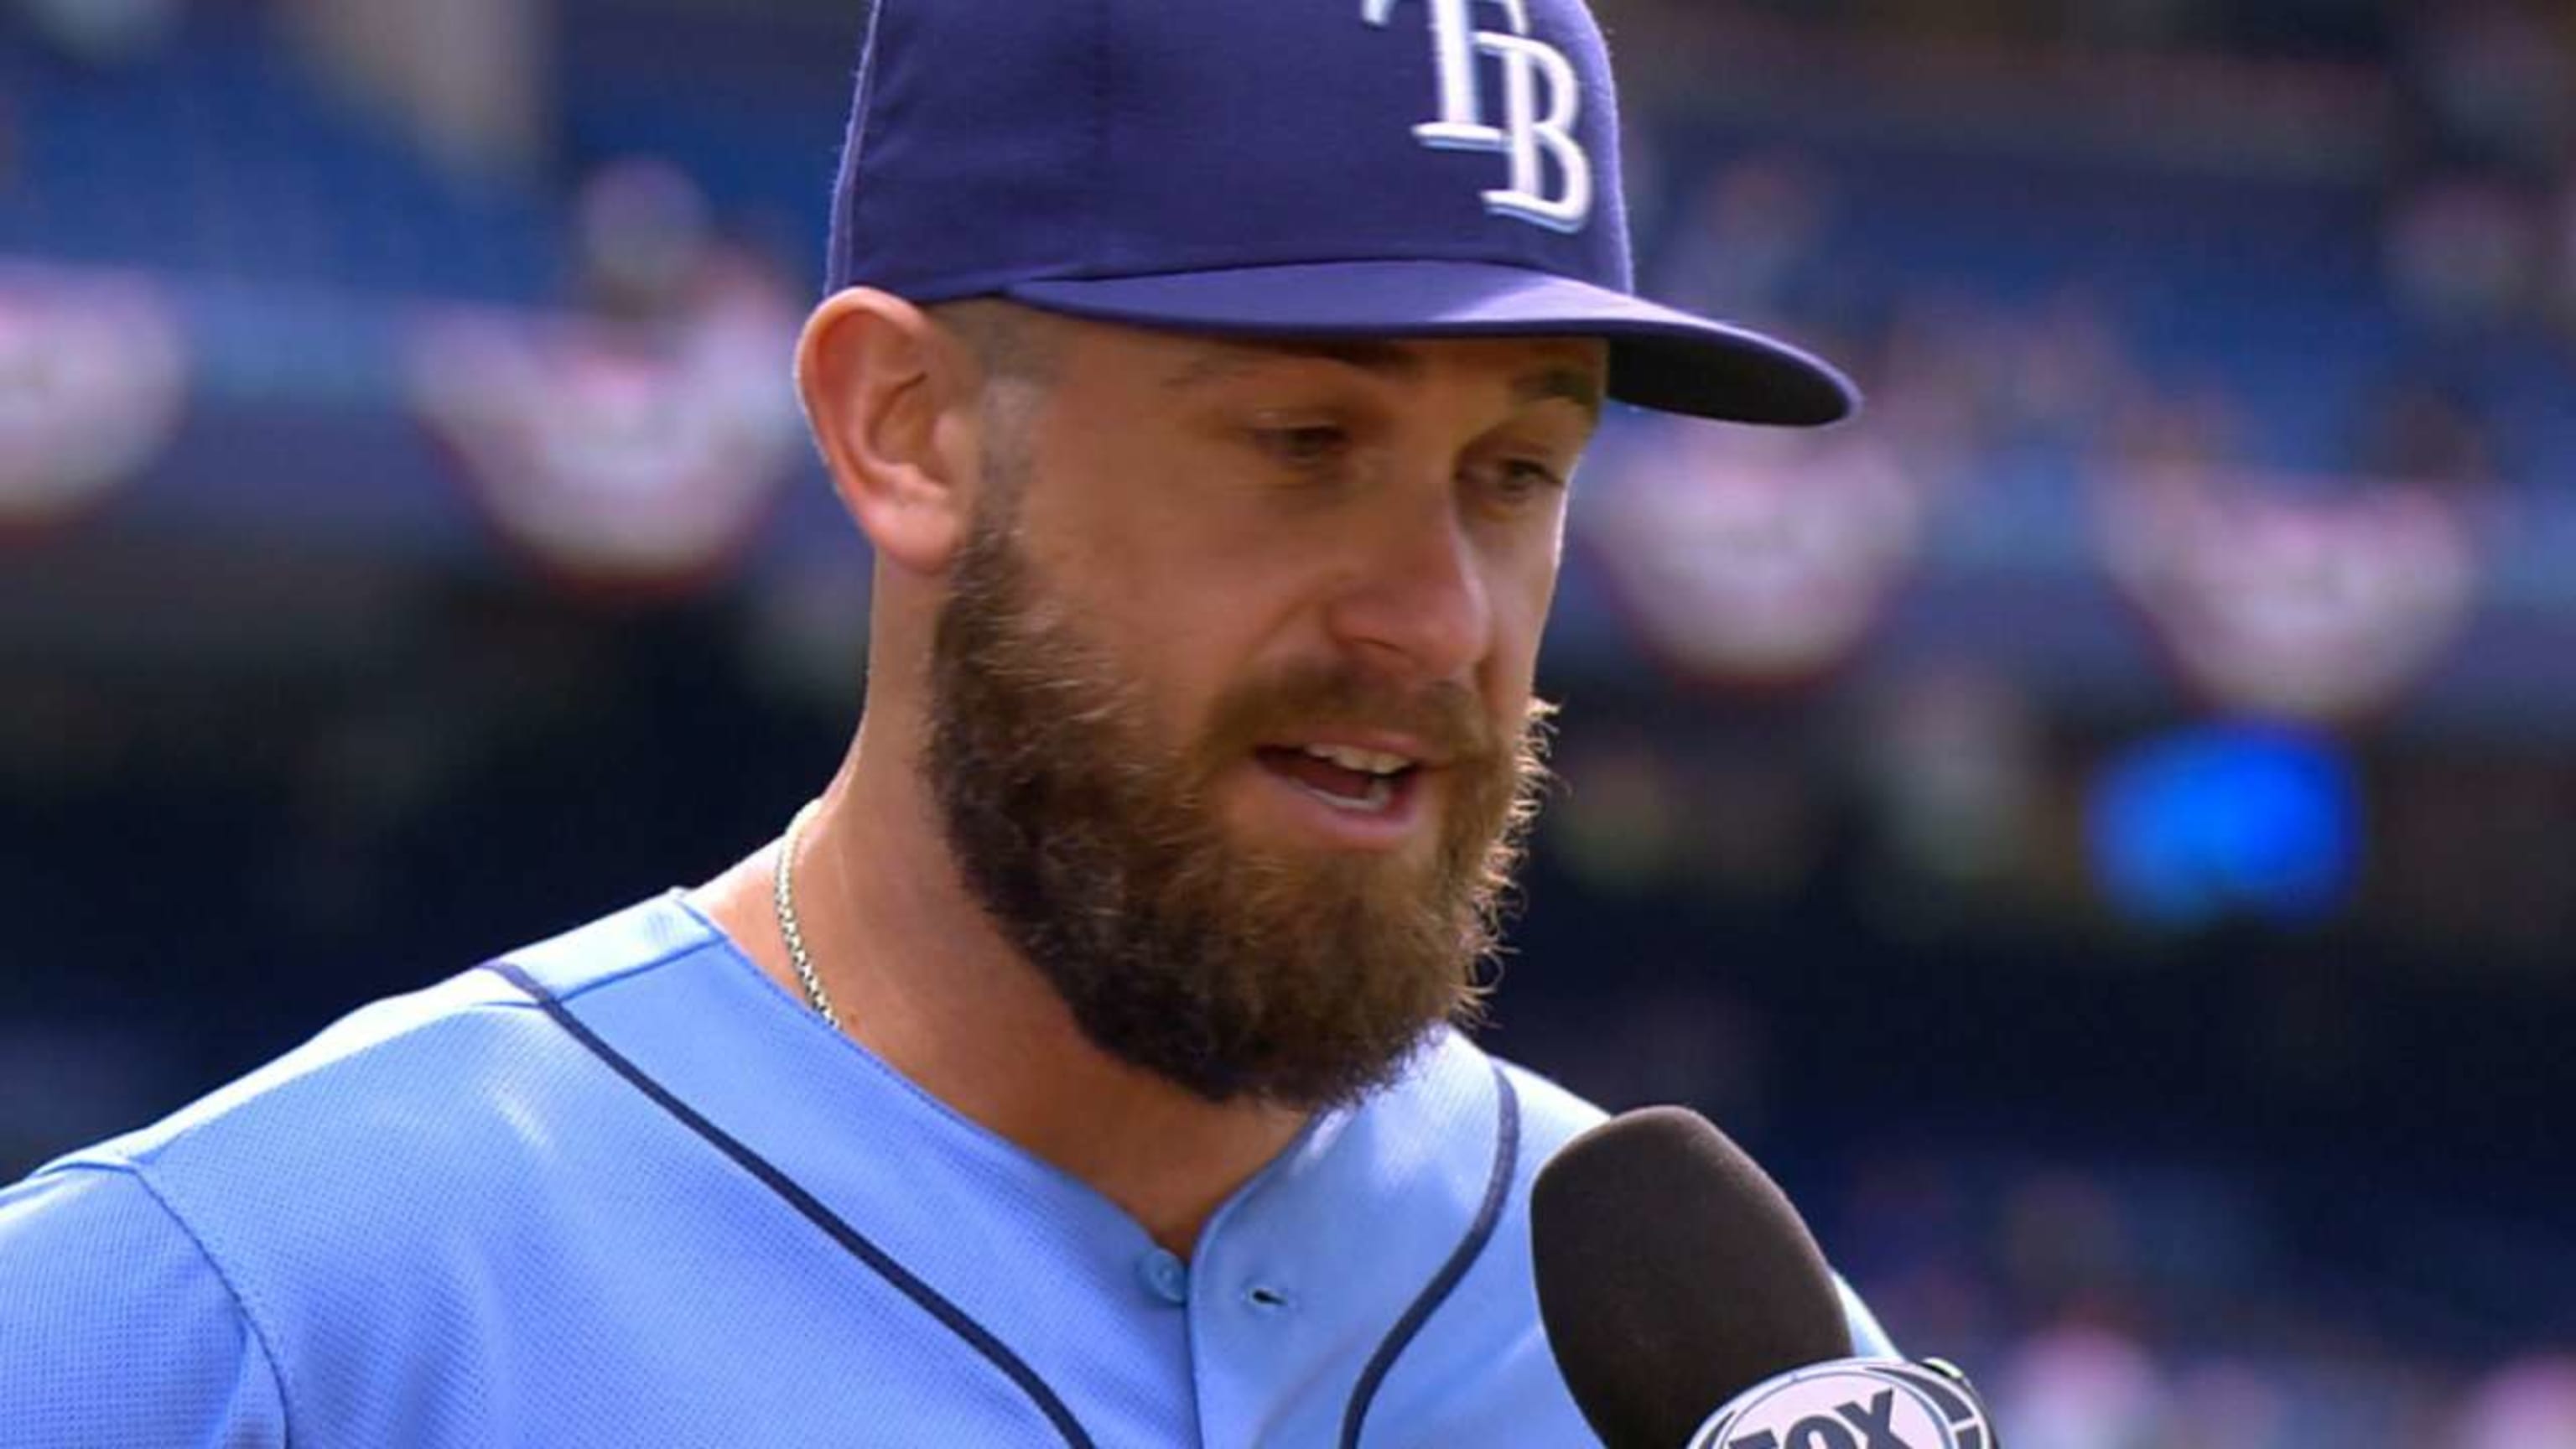 Fennelly: So long Evan Longoria. We'll always have Game 162